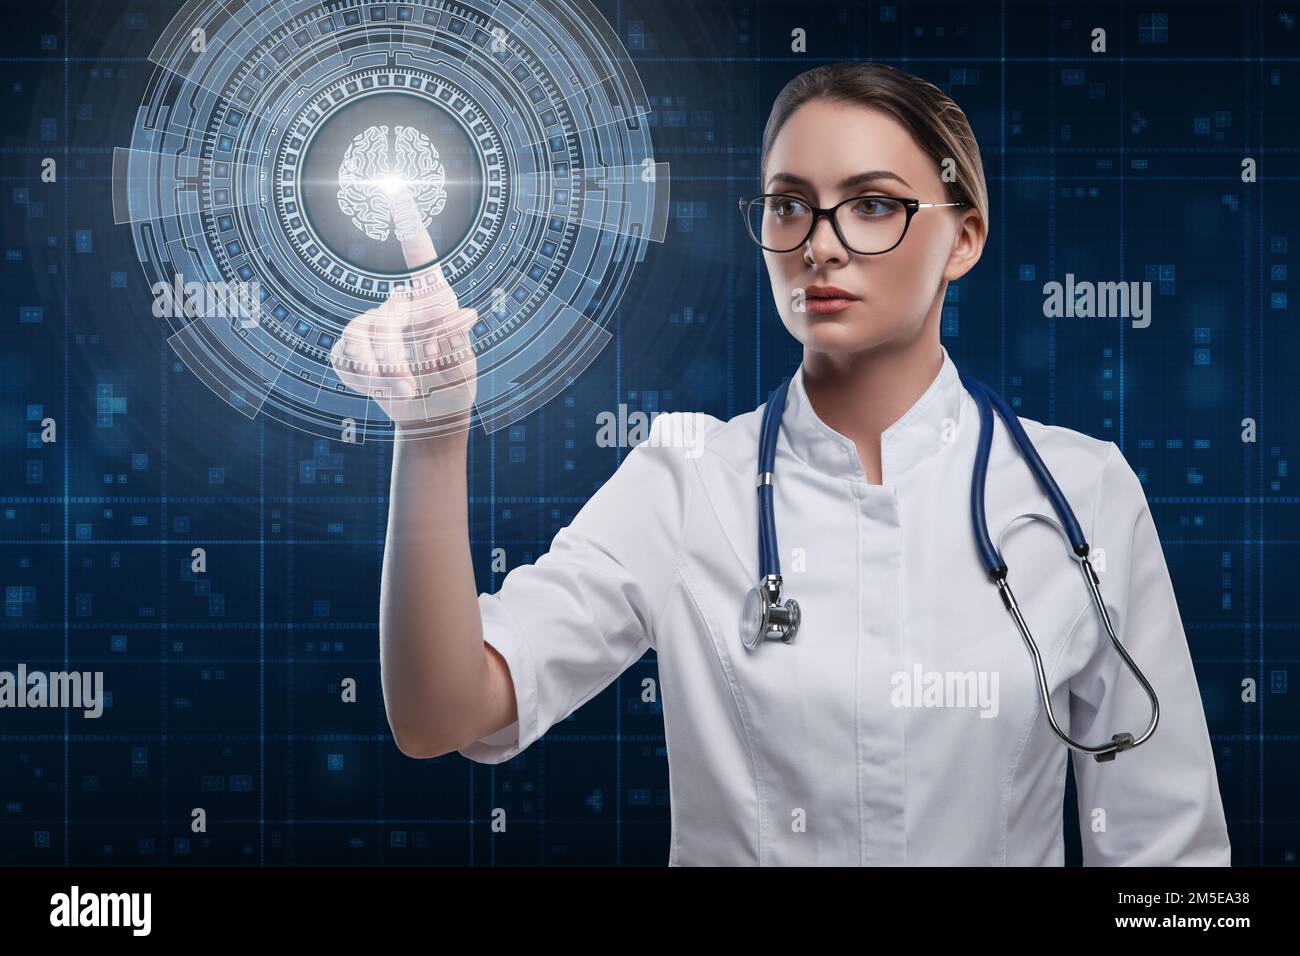 Woman doctor pointing hud futuristic interface. Brain examination concept Stock Photo